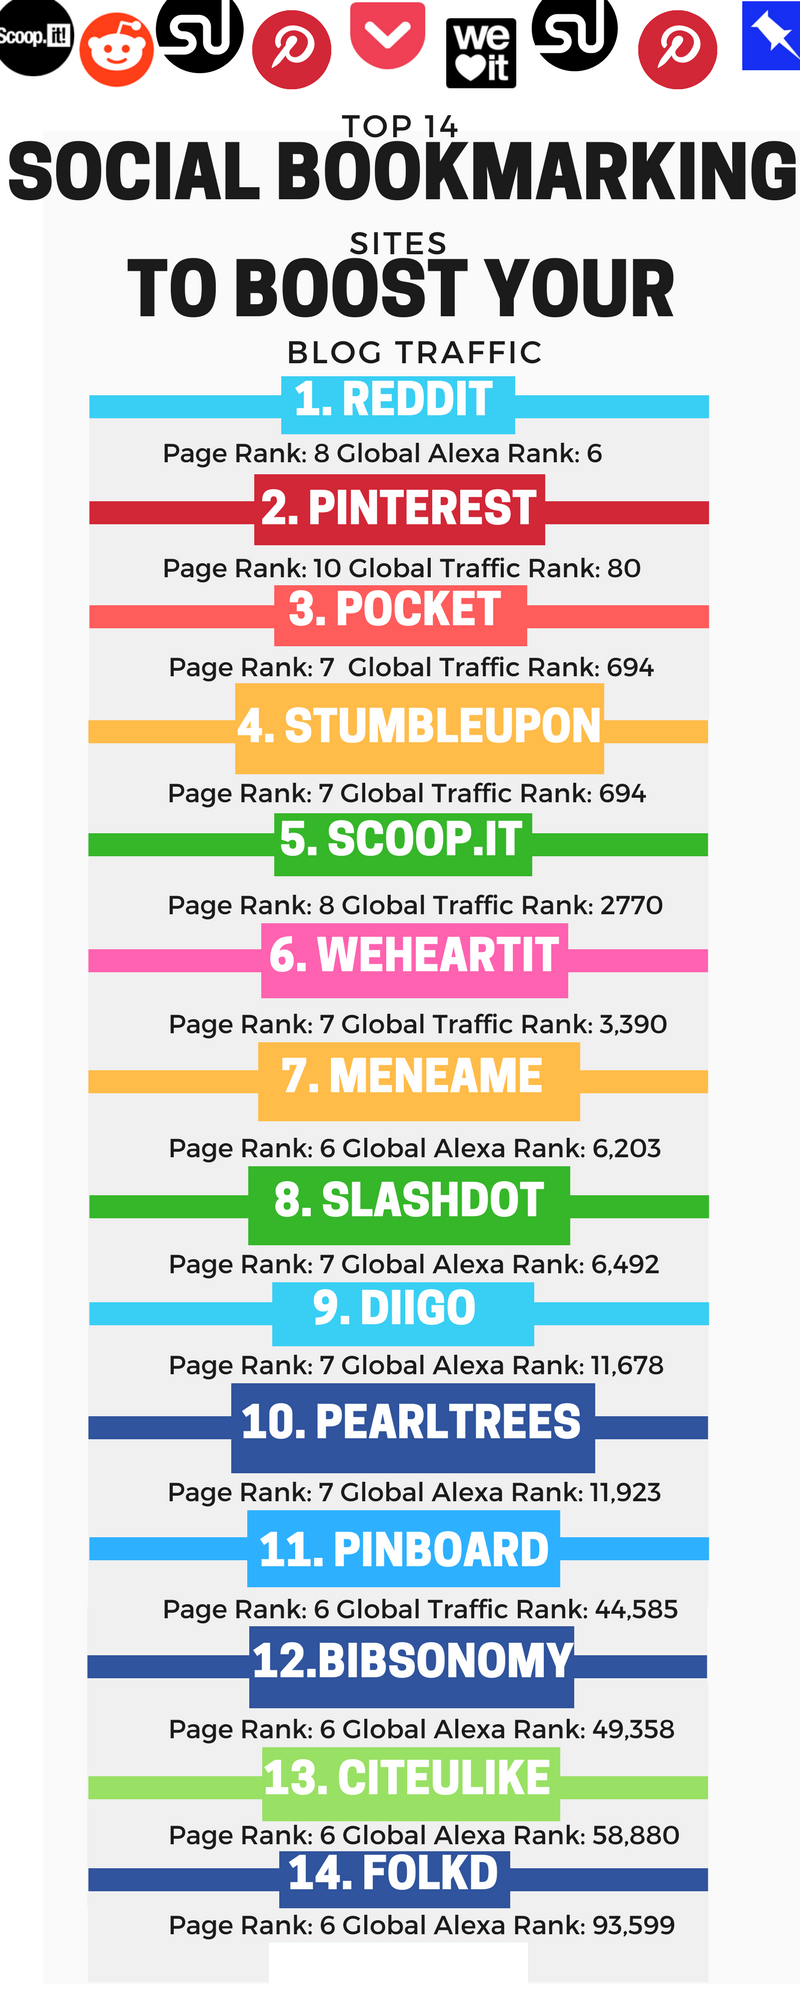 Top-Social-Bookmarking-sites-Infographic